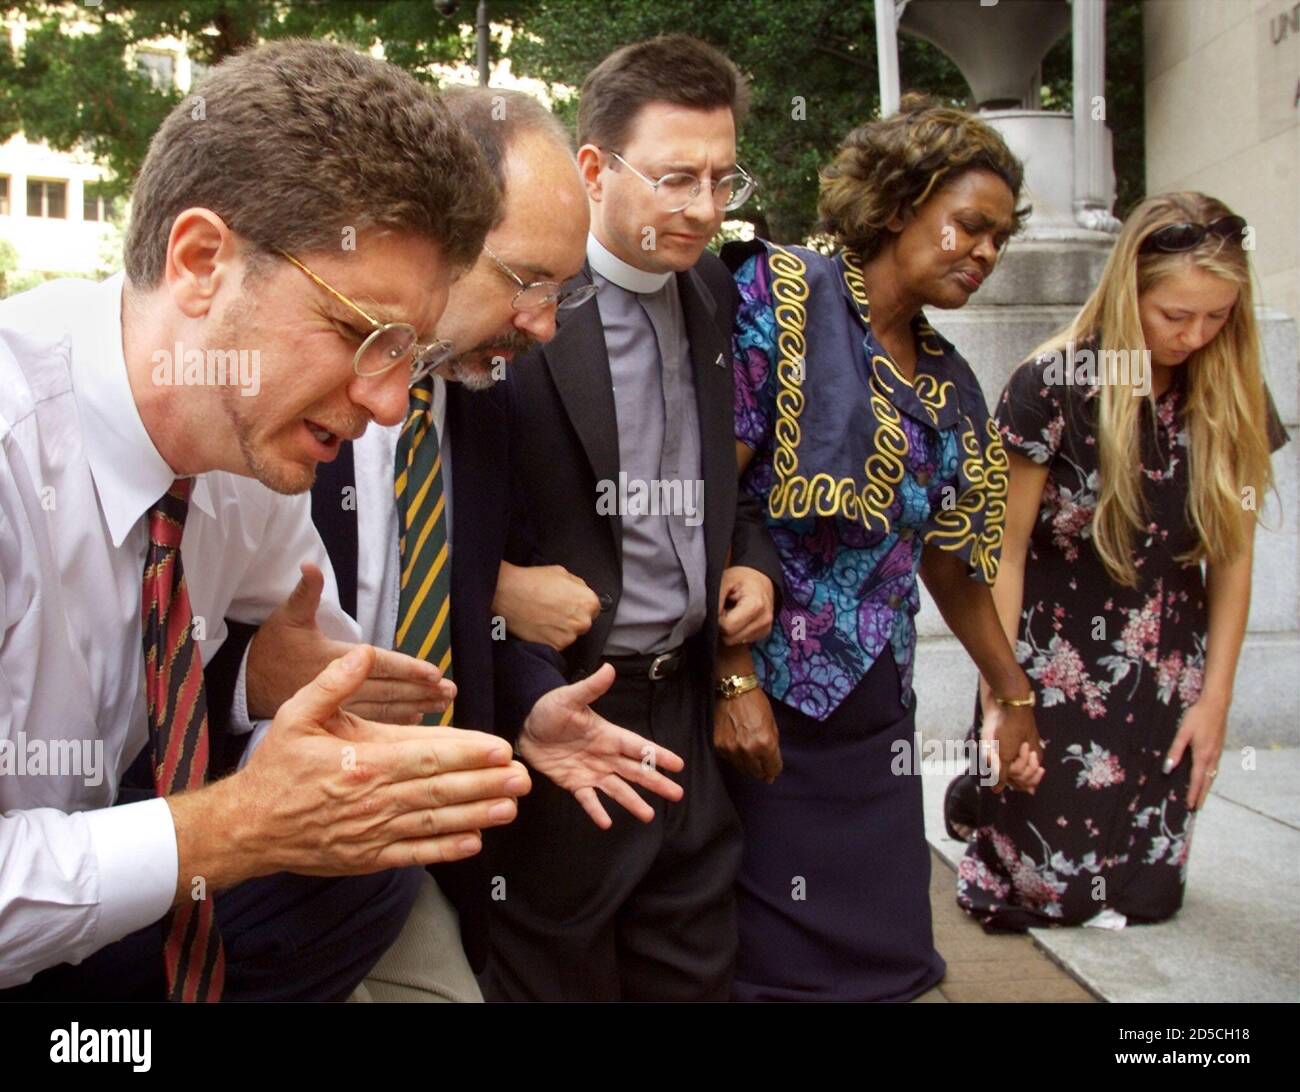 Members of the Christian Defense Coalition pray in front of the Justice Department in Washington, D.C. September 1. The group first held a press conference to call for an independent investigation of the of the Clinton administration's handling of the 1993 destruction of the Branch Davidian compound in Waco, Texas. From left to right are Randall Terry, Operation Rescue; Rev. Patrick Mahoney, Christian Defense Coalition; Rev. Robert Schenk, National Clergy Council; Rev. Imagene Stewart, African-American Women's Clergy Association; and Brandi Swindell from the American Center for Law and Justice Stock Photo